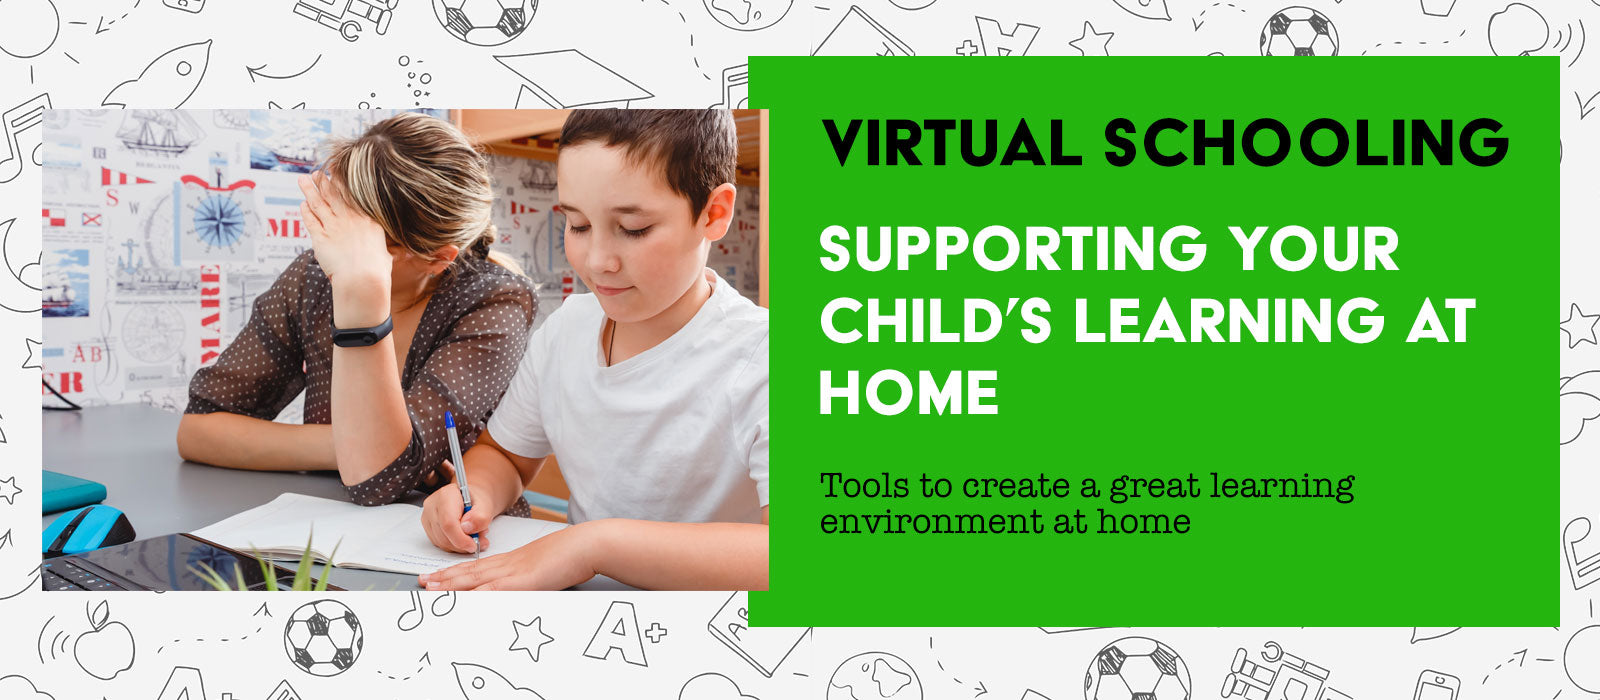 Virtual Learning: Create a Great Learning Environment